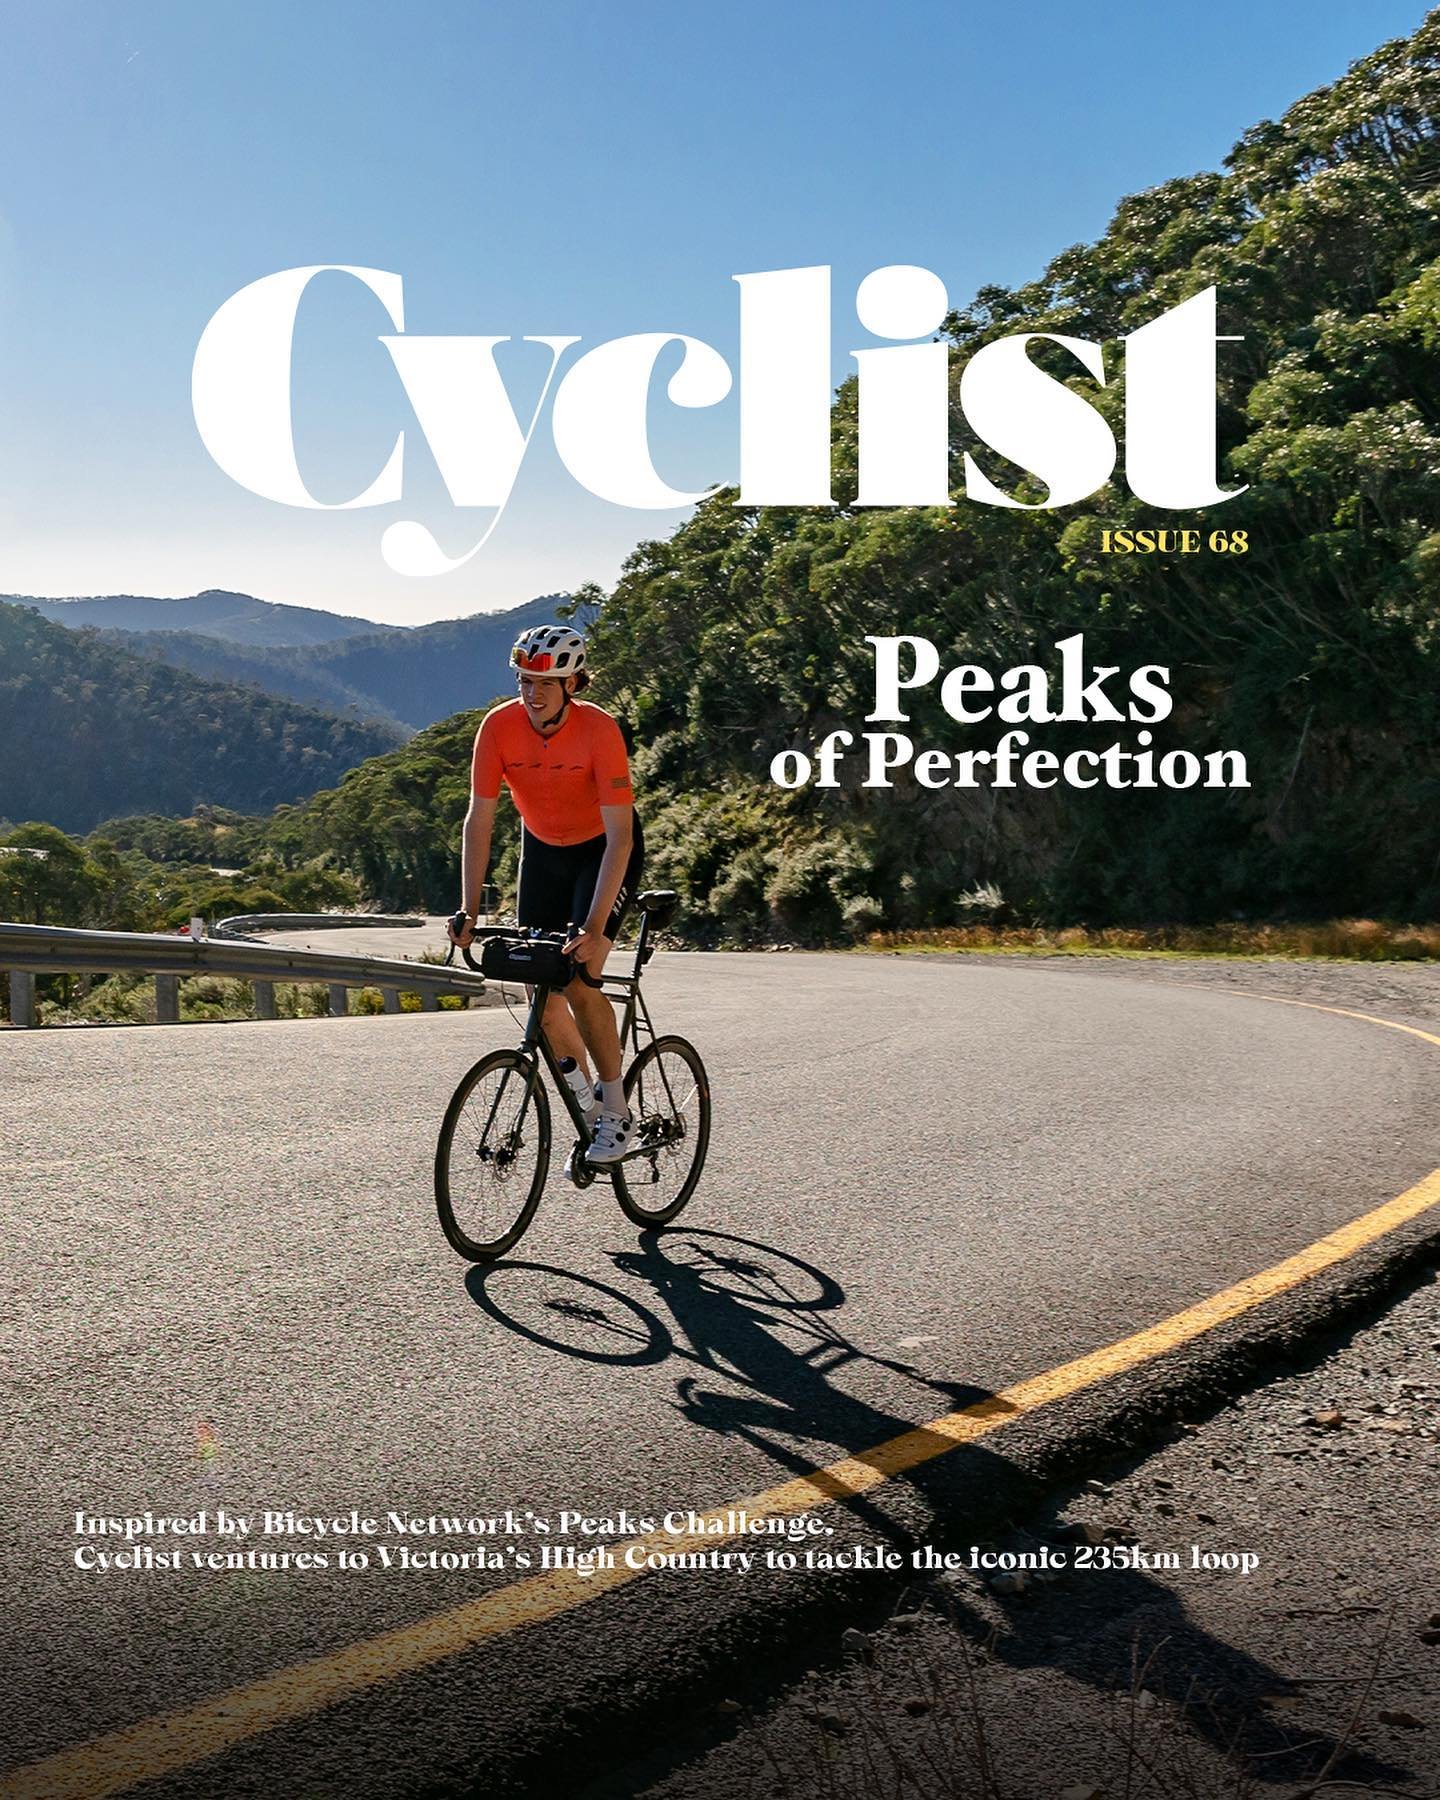 @cyclistaus Issue 68

Cycling the infamous Peaks challenge loop for the first time was in the simplest words excited. When I reached the top of Mount Hotham I couldn&rsquo;t stop smiling 😂

Keep to get back up here over May/June for some heavy train